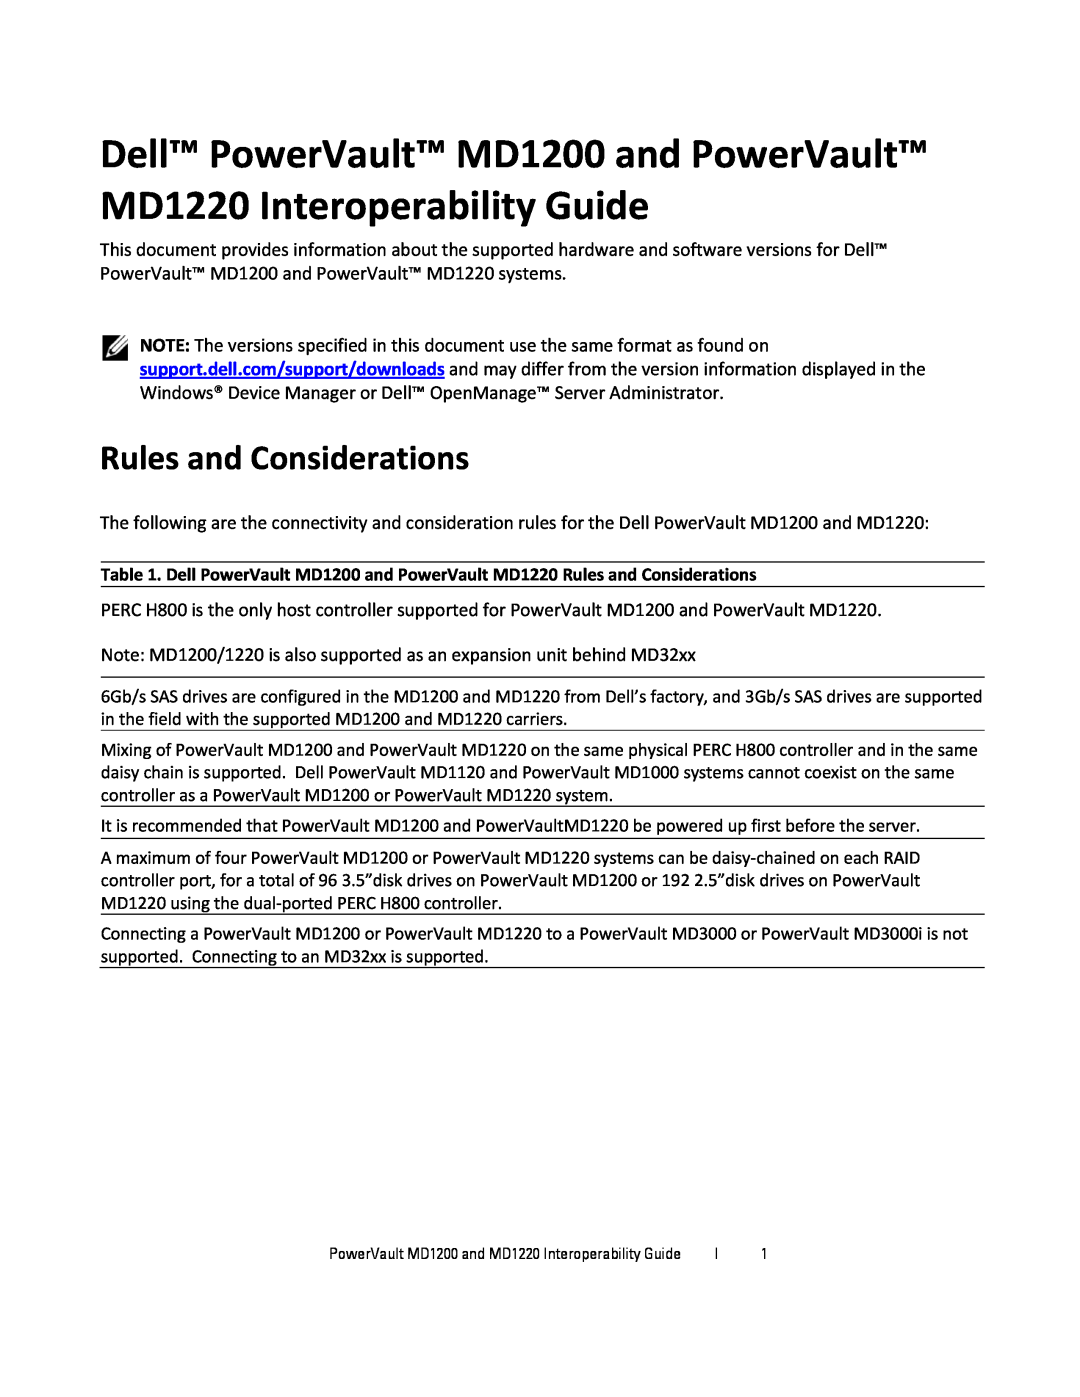 Dell manual Rules and Considerations, Dell PowerVault MD1200 and PowerVault MD1220 Interoperability Guide 